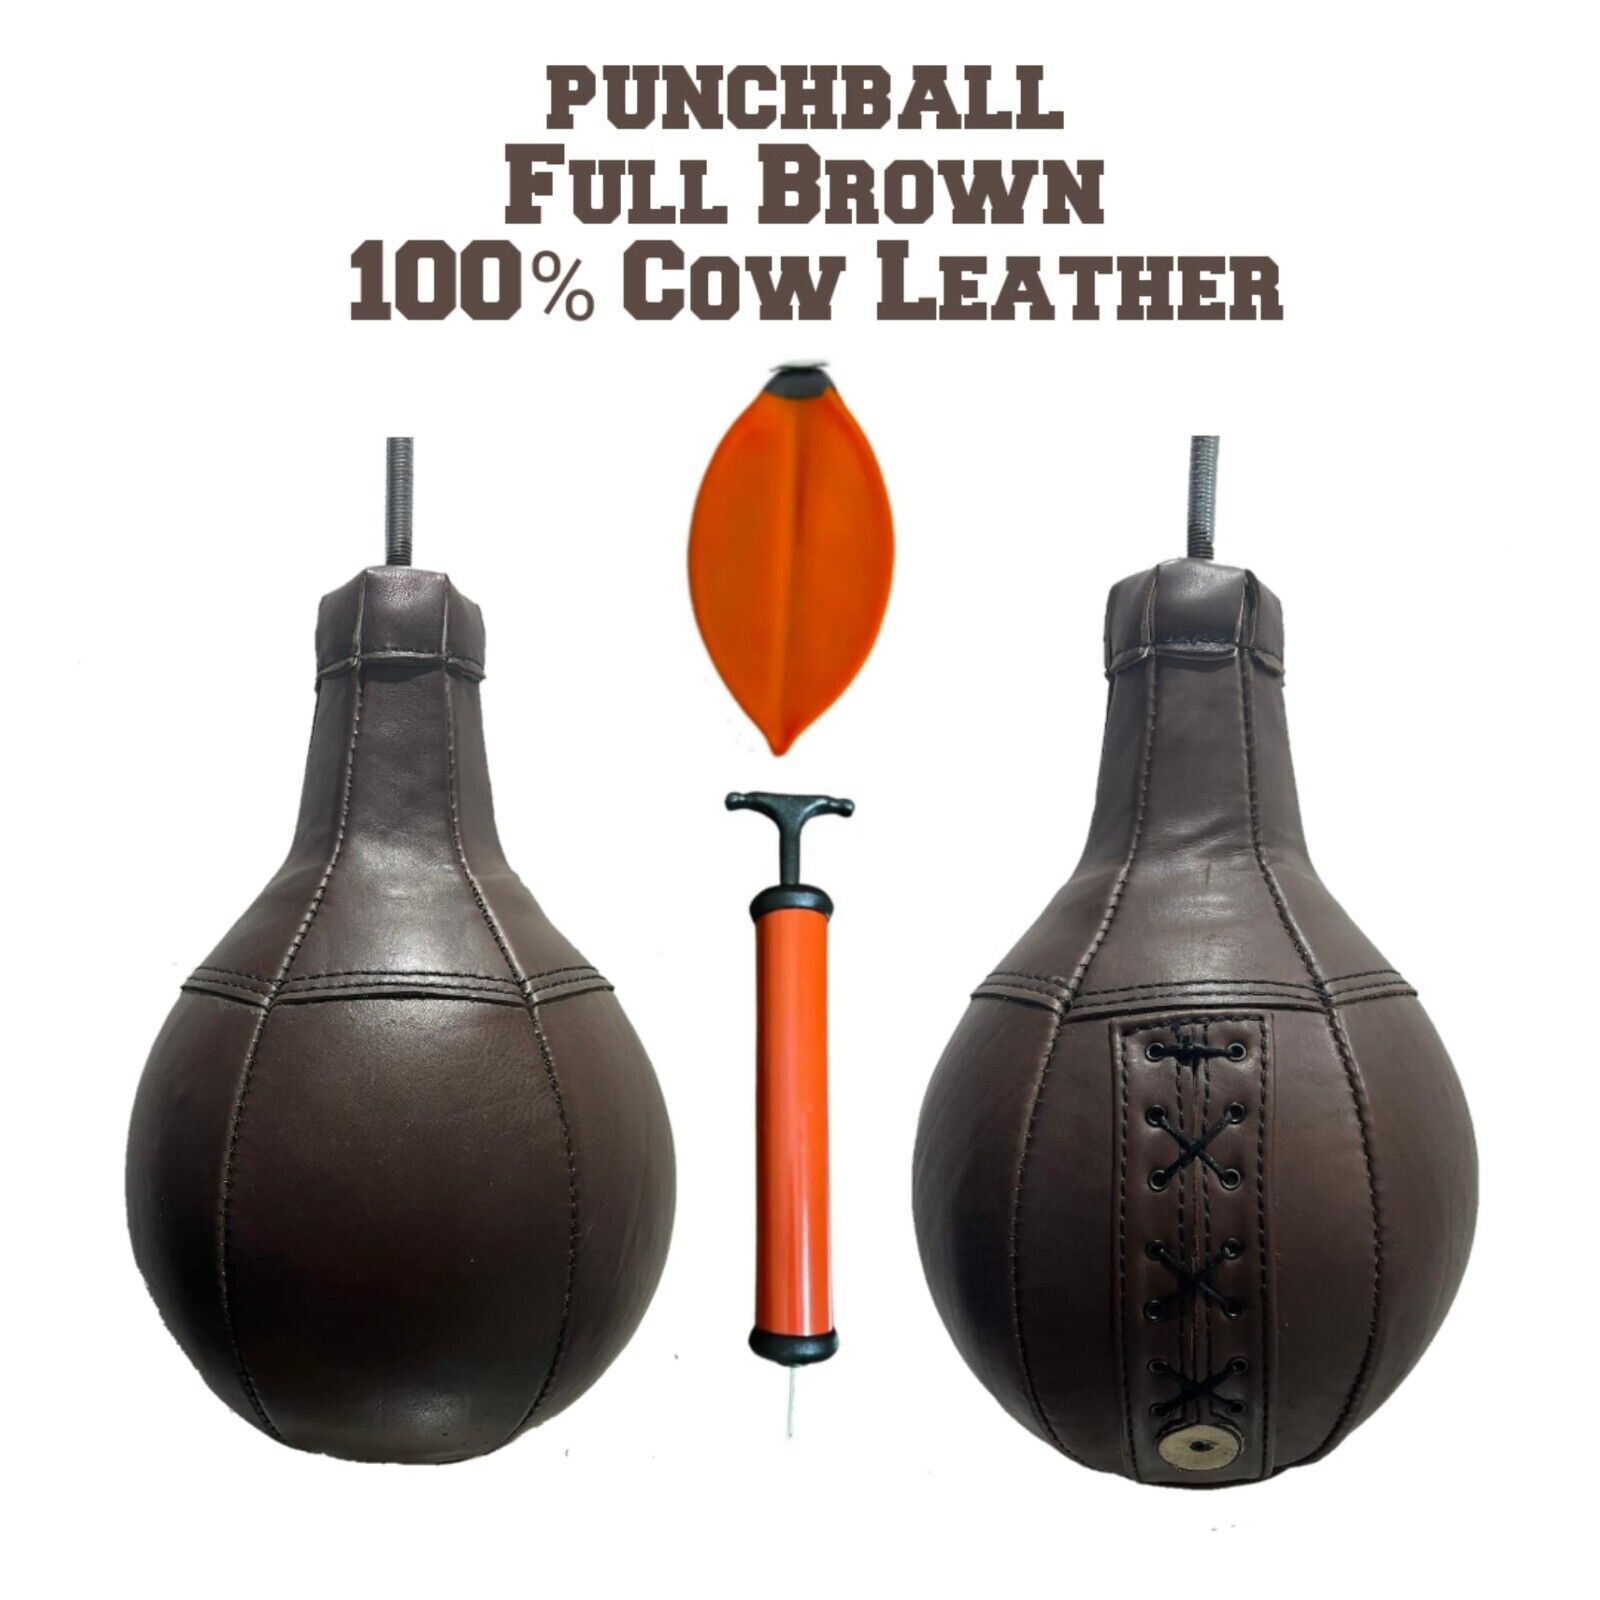 Punchball for boxer machine Punching ball for arcade game. FREE EXTRA BLADDER